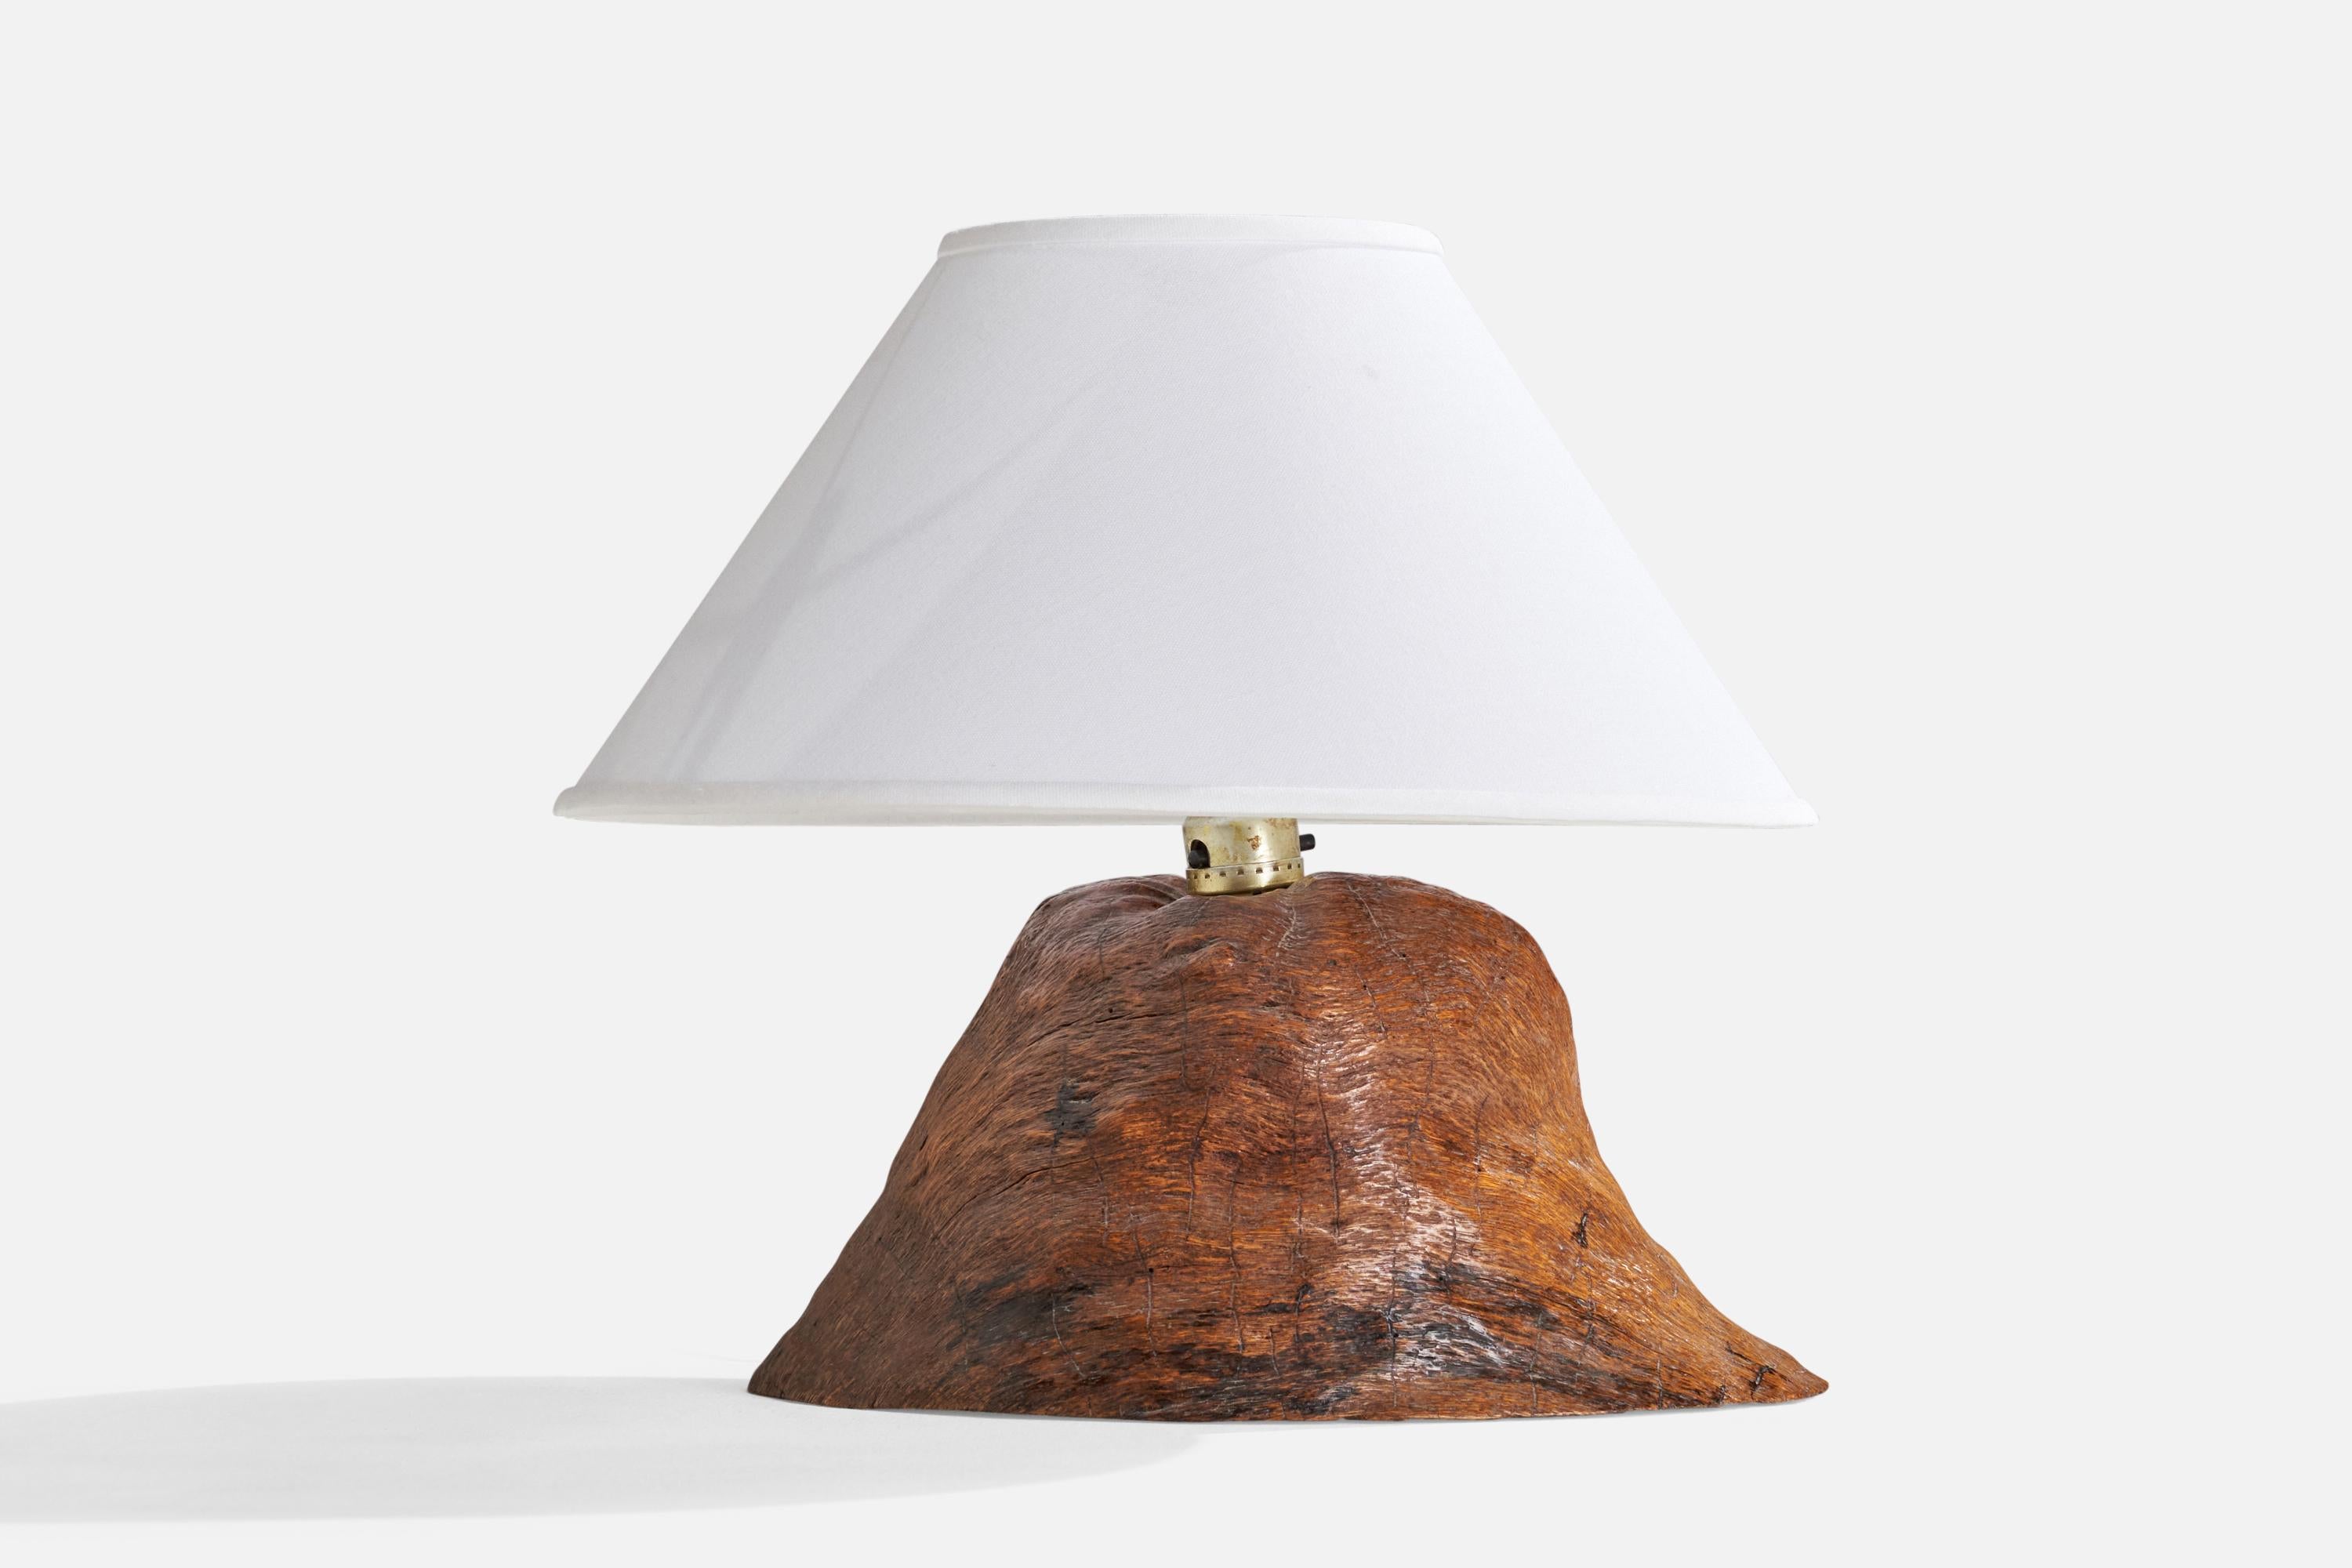 A burl wood and brass table lamp designed and produced in the US, 1950s.

Dimensions of Lamp (inches): 13”  H x 9” Diameter
Dimensions of Shade (inches): 6”  Top Diameter x 16”  Bottom Diameter x 9” H
Dimensions of Lamp with Shade (inches): 15” H x